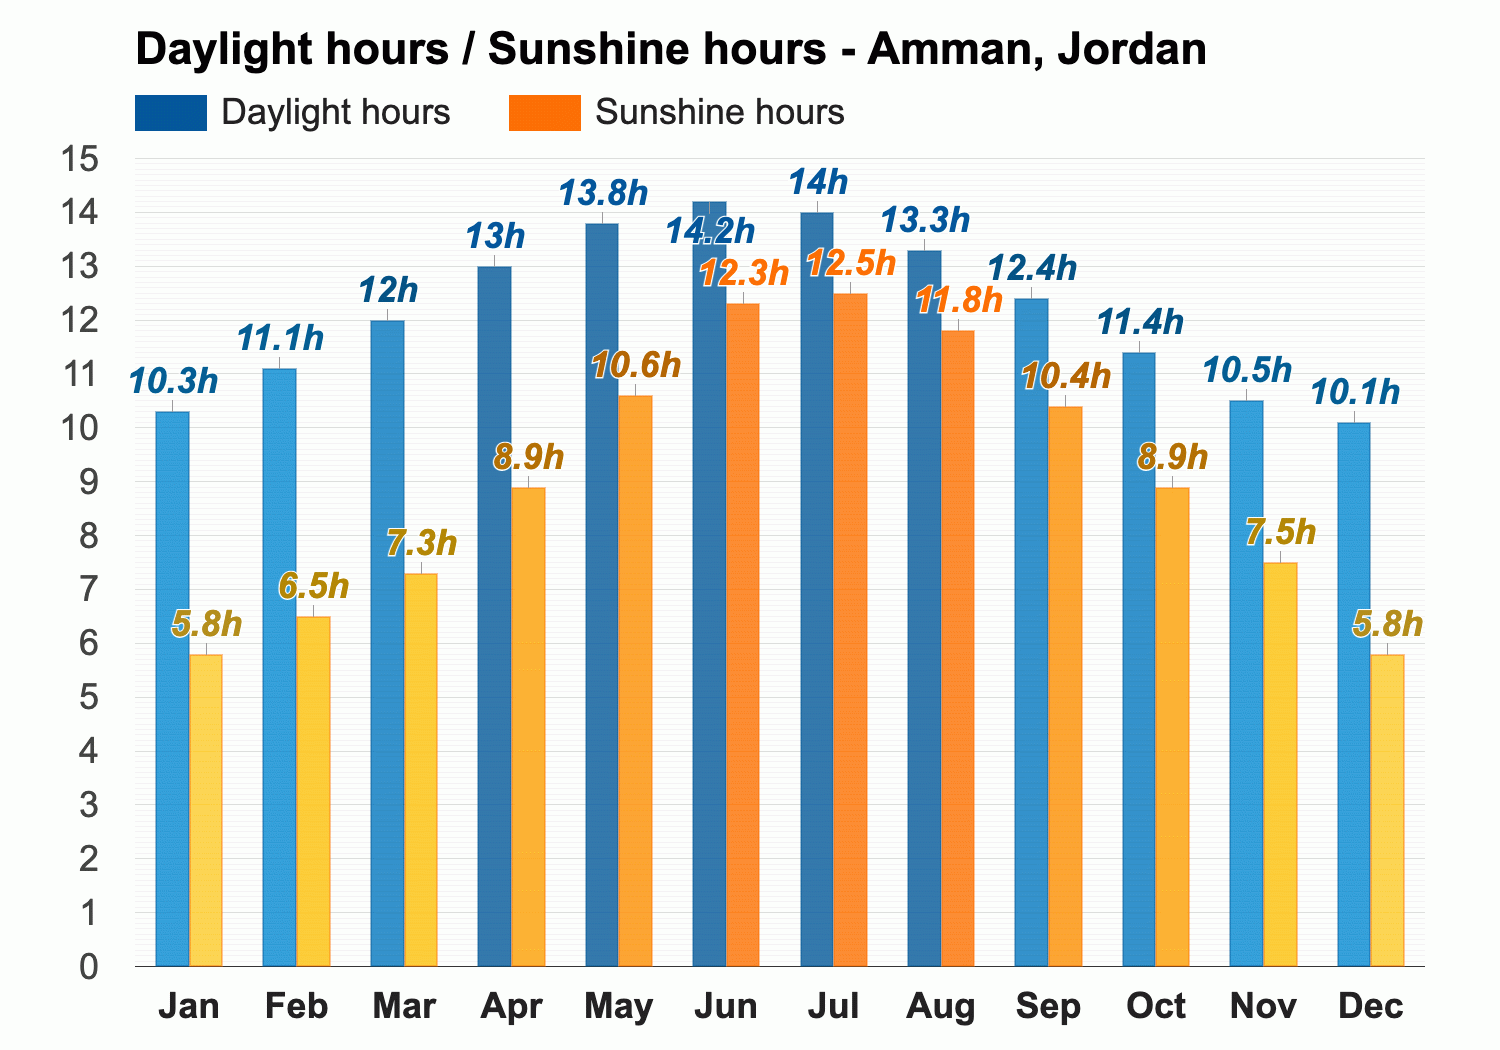 Amman, Jordan - Detailed climate and weather forecast | Weather Atlas